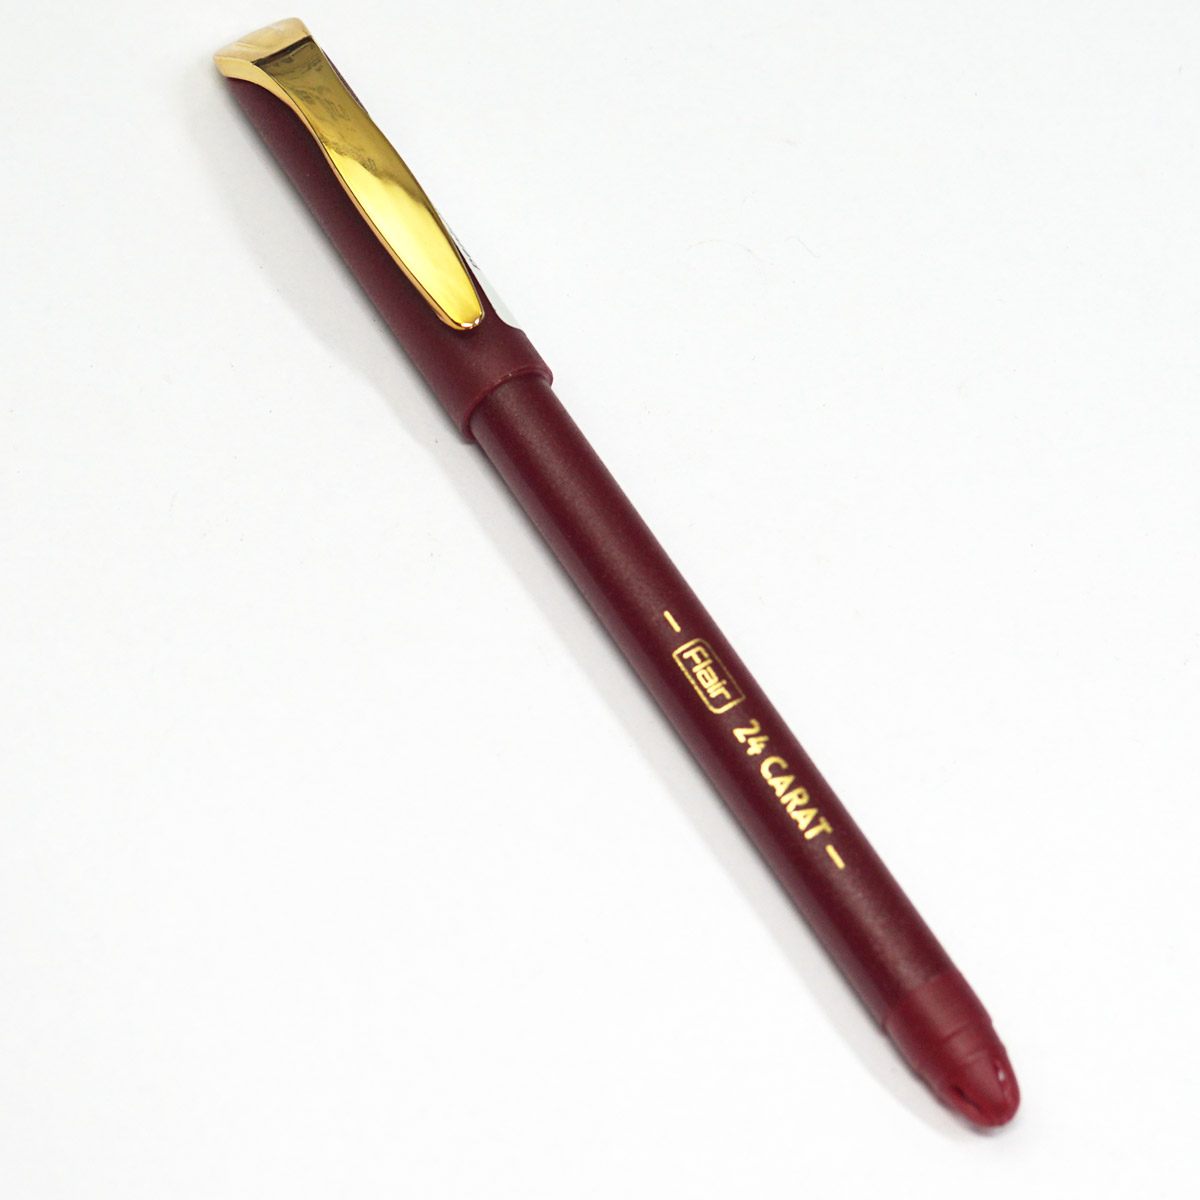 Flair 24 Carat Red Color Body With Golden Color Clip Fine Tip Blue Writing Cap Type Ball Pen SKU 23447